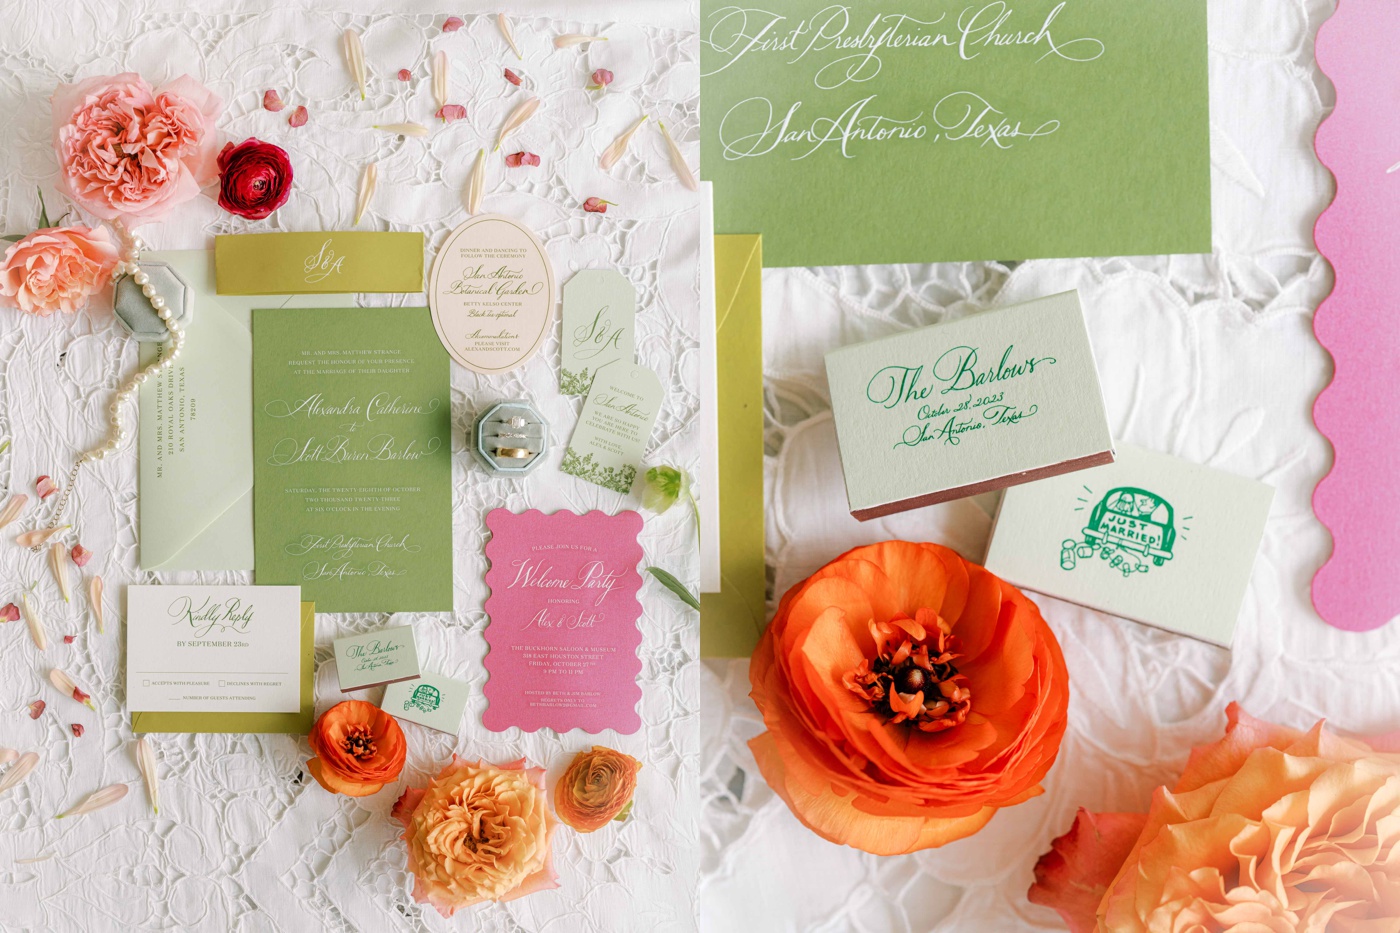 Colorful wedding invitation flatlay on a lace tablecloth